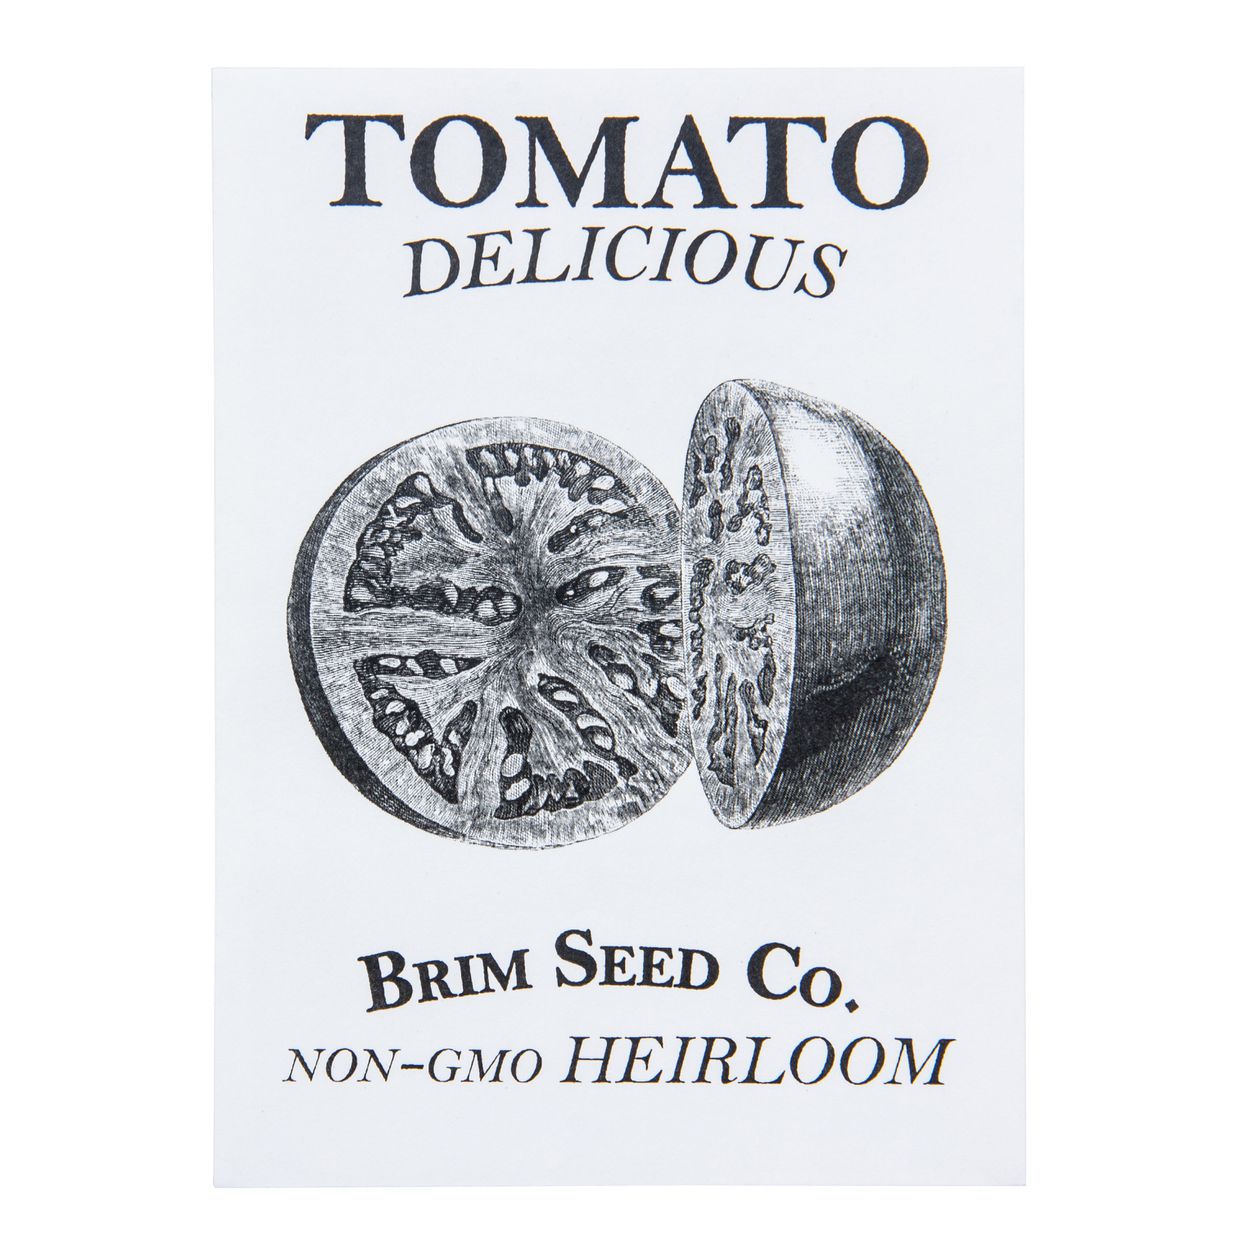 Brim Seed Co. - Delicious Tomato Heirloom Seed